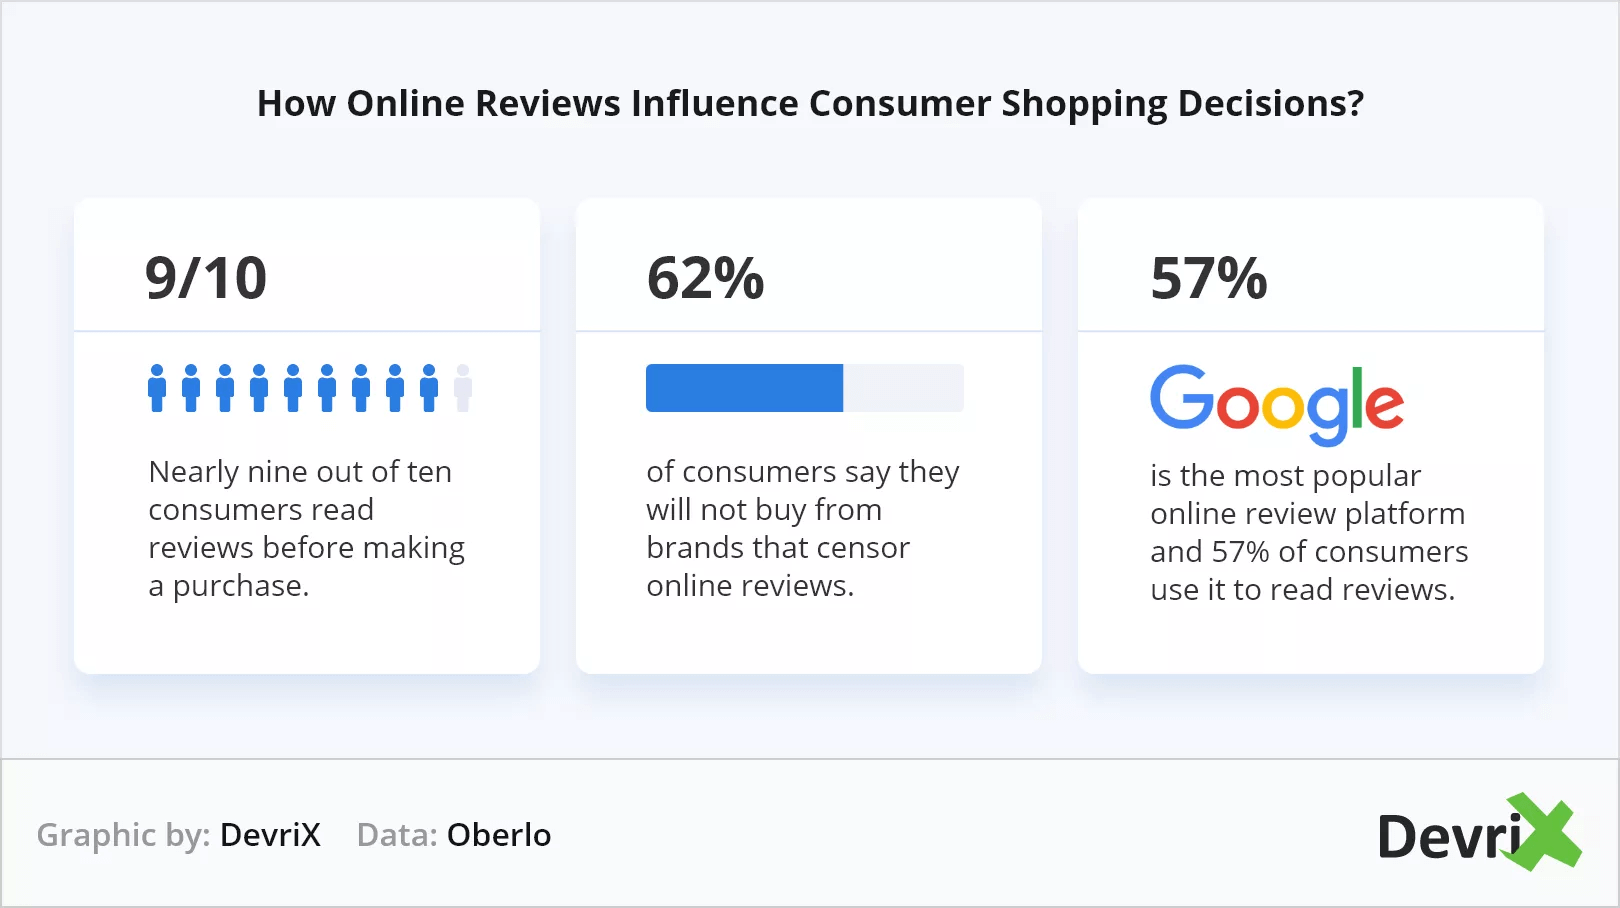 How Online Reviews Influence Consumer Shopping Decisions